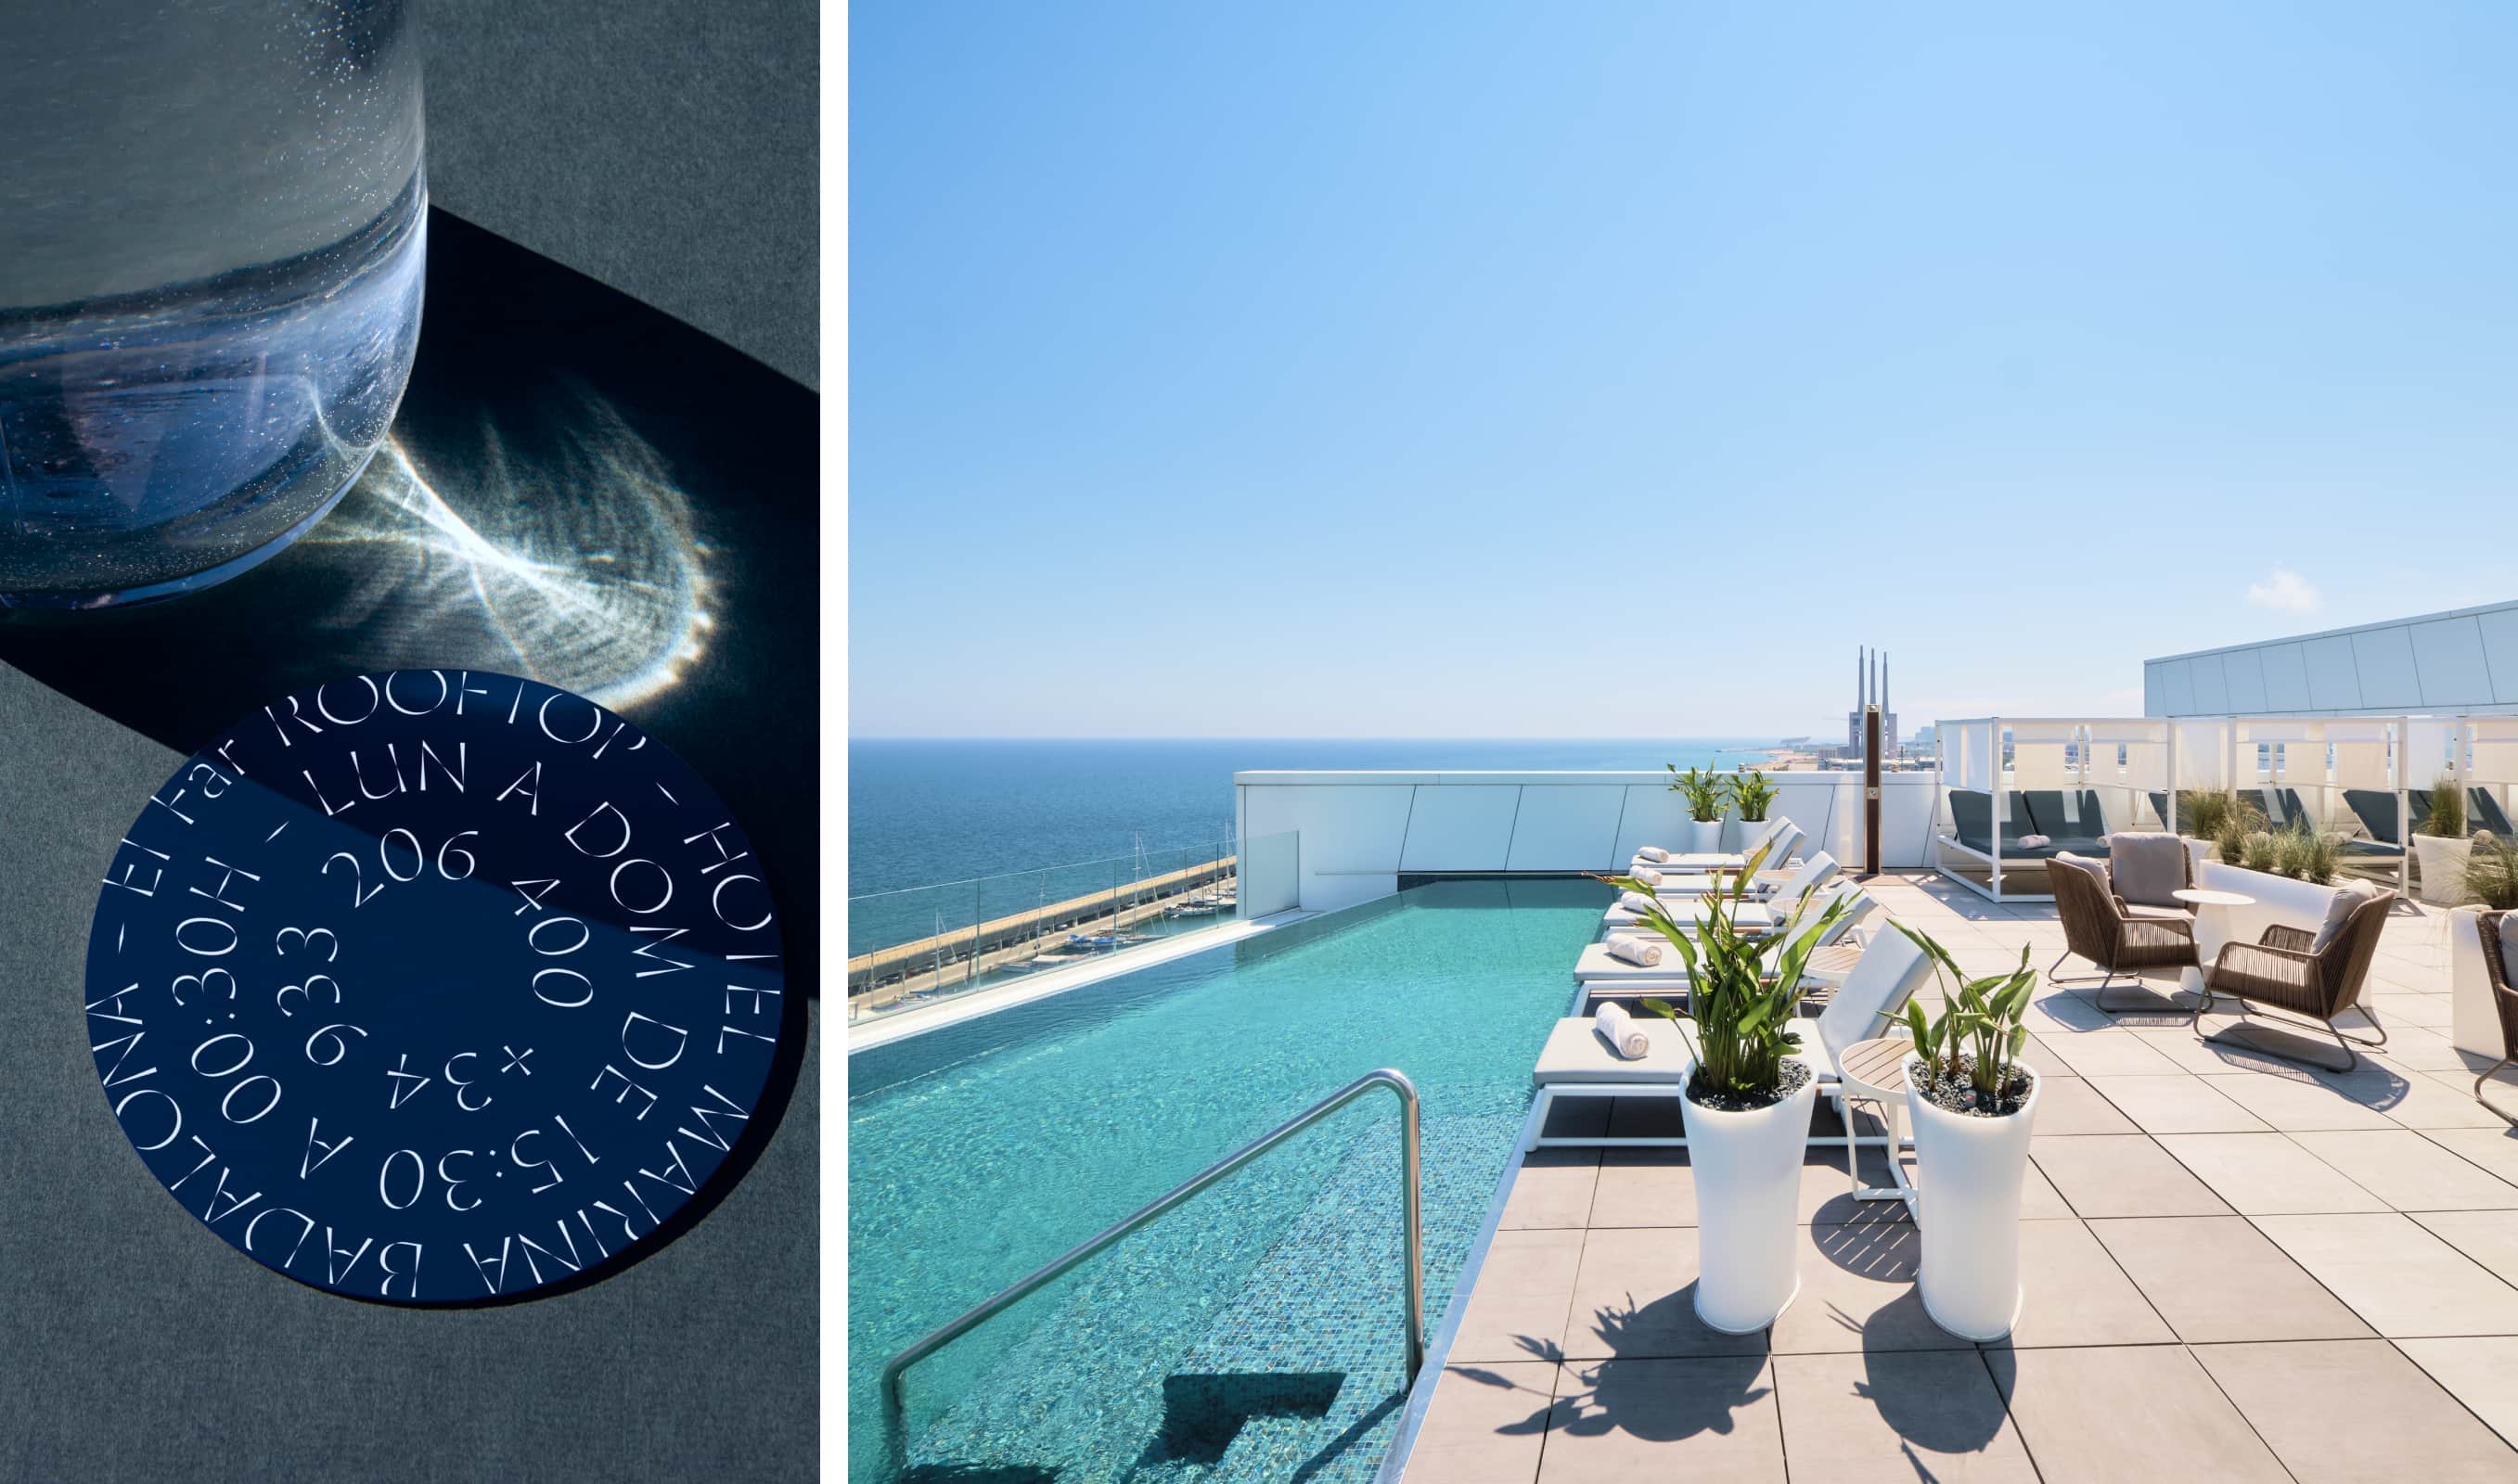 We developed the identity and outlets of the Hotel Marina Badalona, a new Sallés Group hotel with a privileged location and direct connection to Barcelona, which offers luxurious stays, and high-quality gastronomy and wellbeing. 
